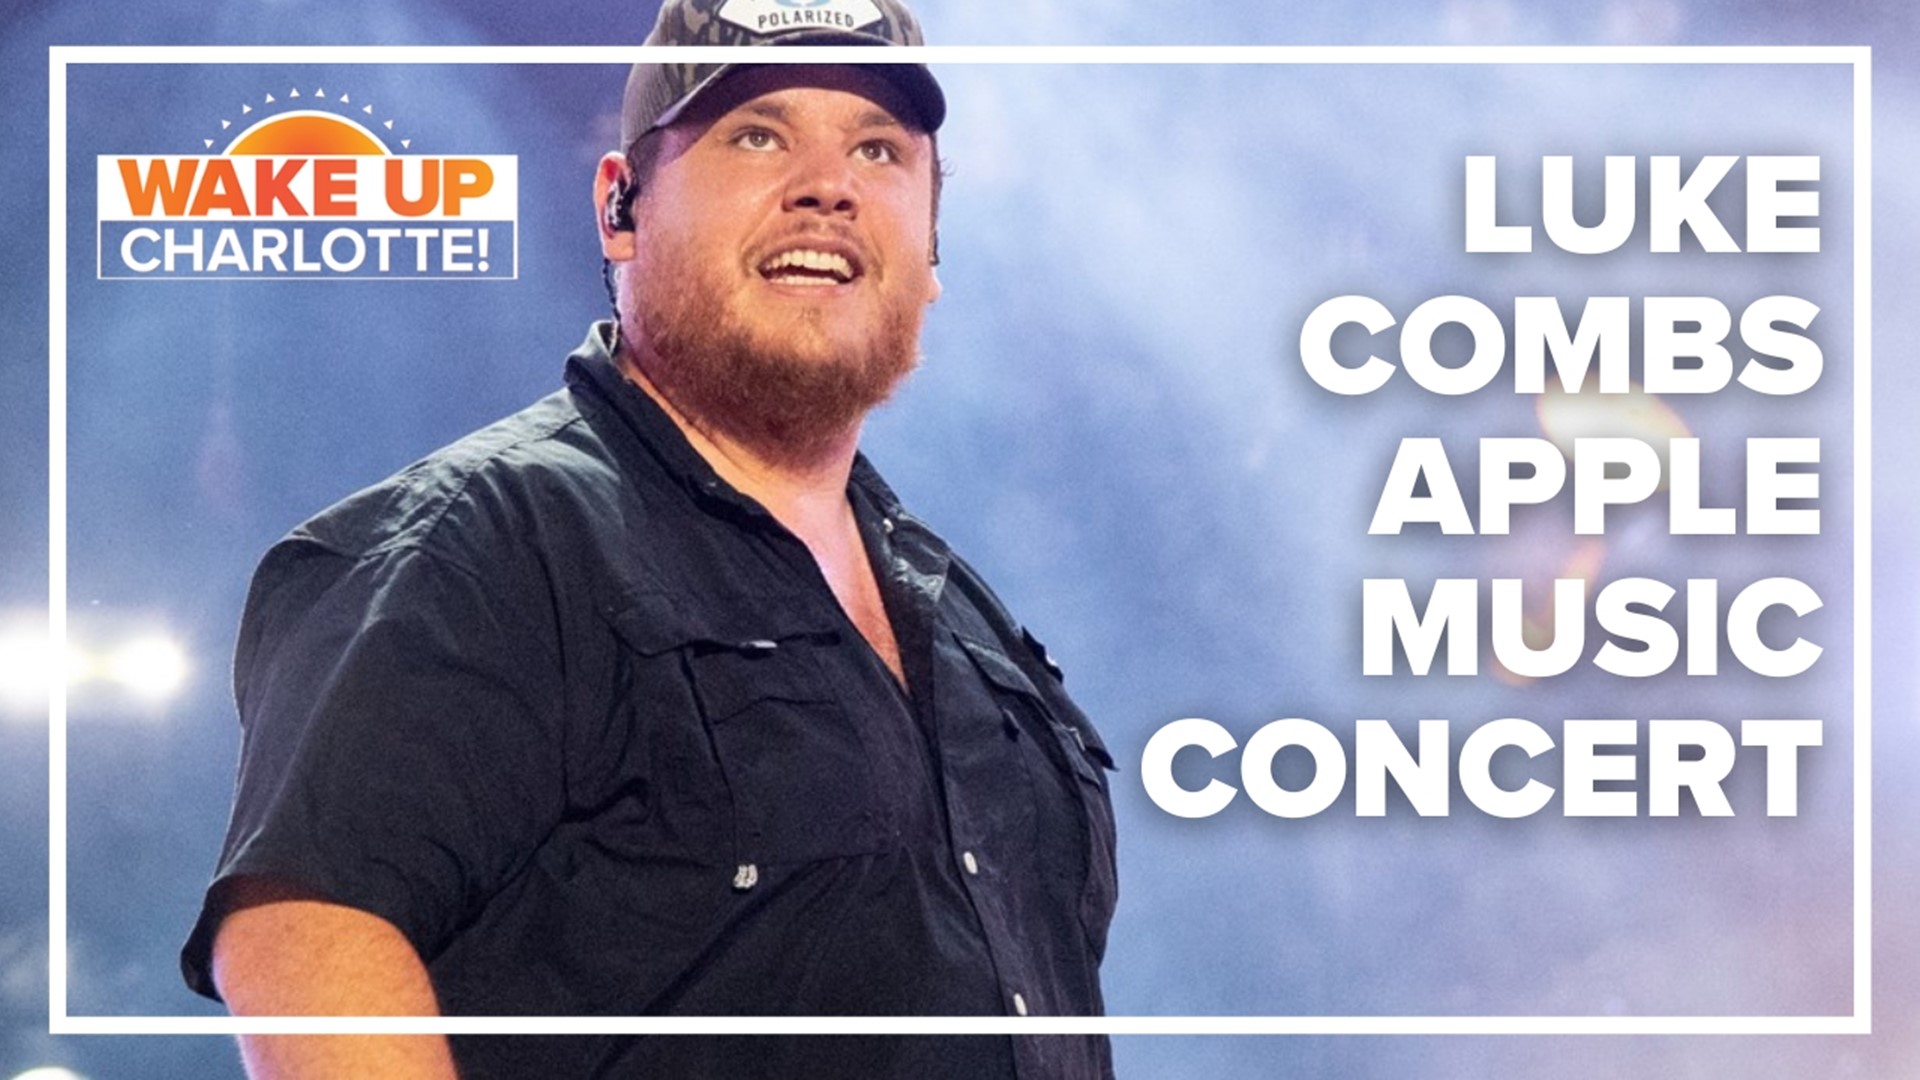 Apple Music will present an exclusive Luke Combs "Hometown Performance" from July